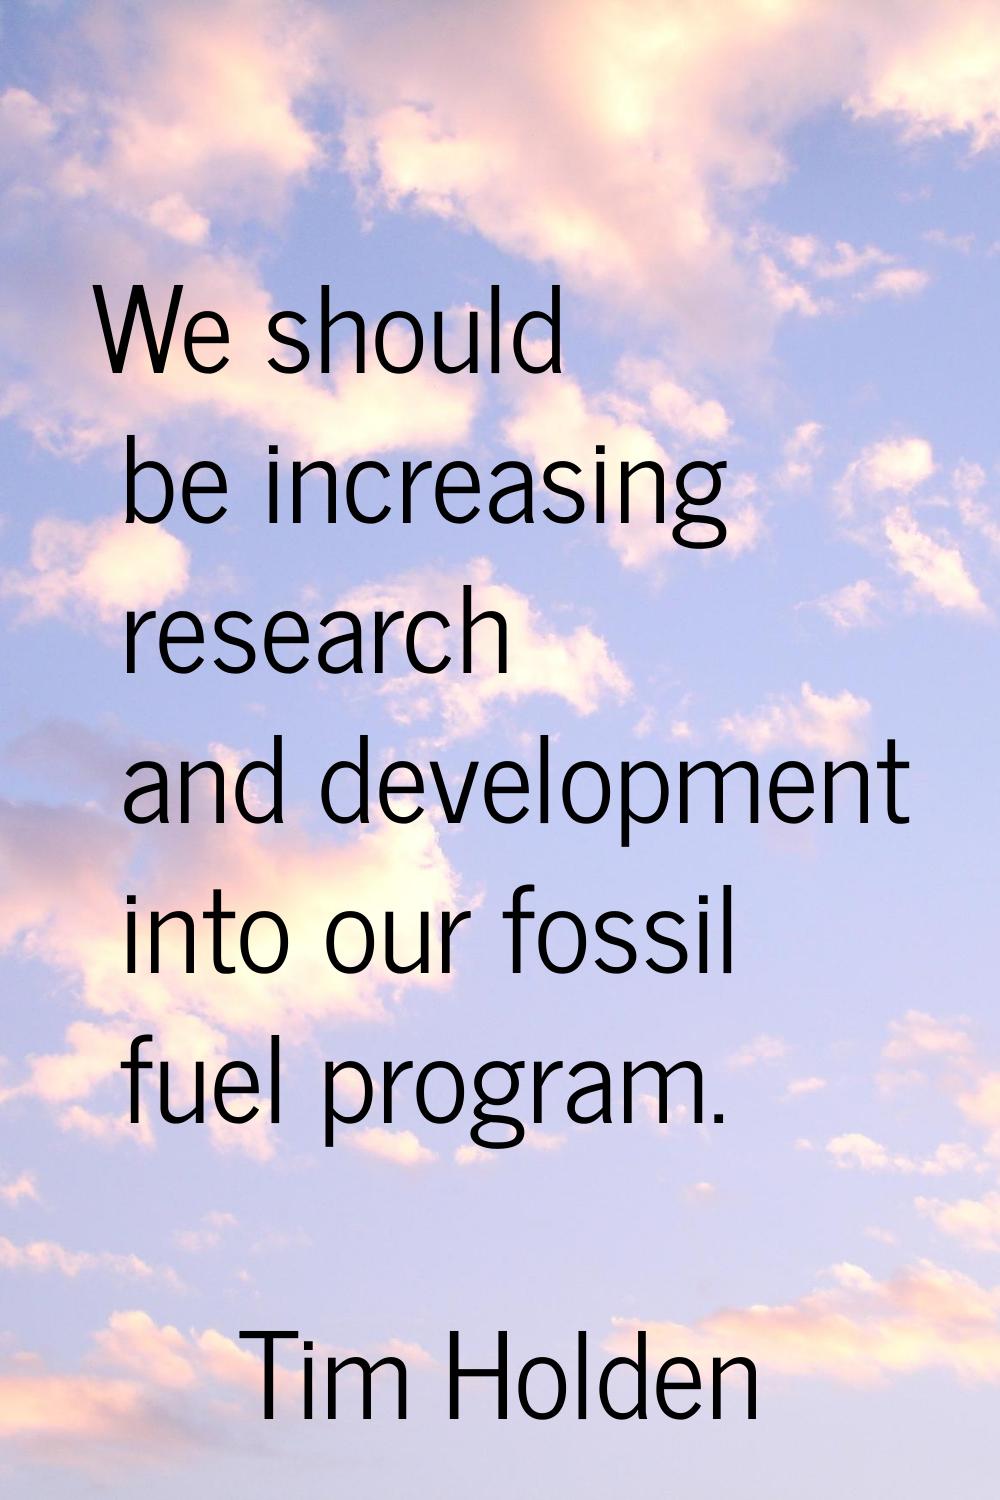 We should be increasing research and development into our fossil fuel program.